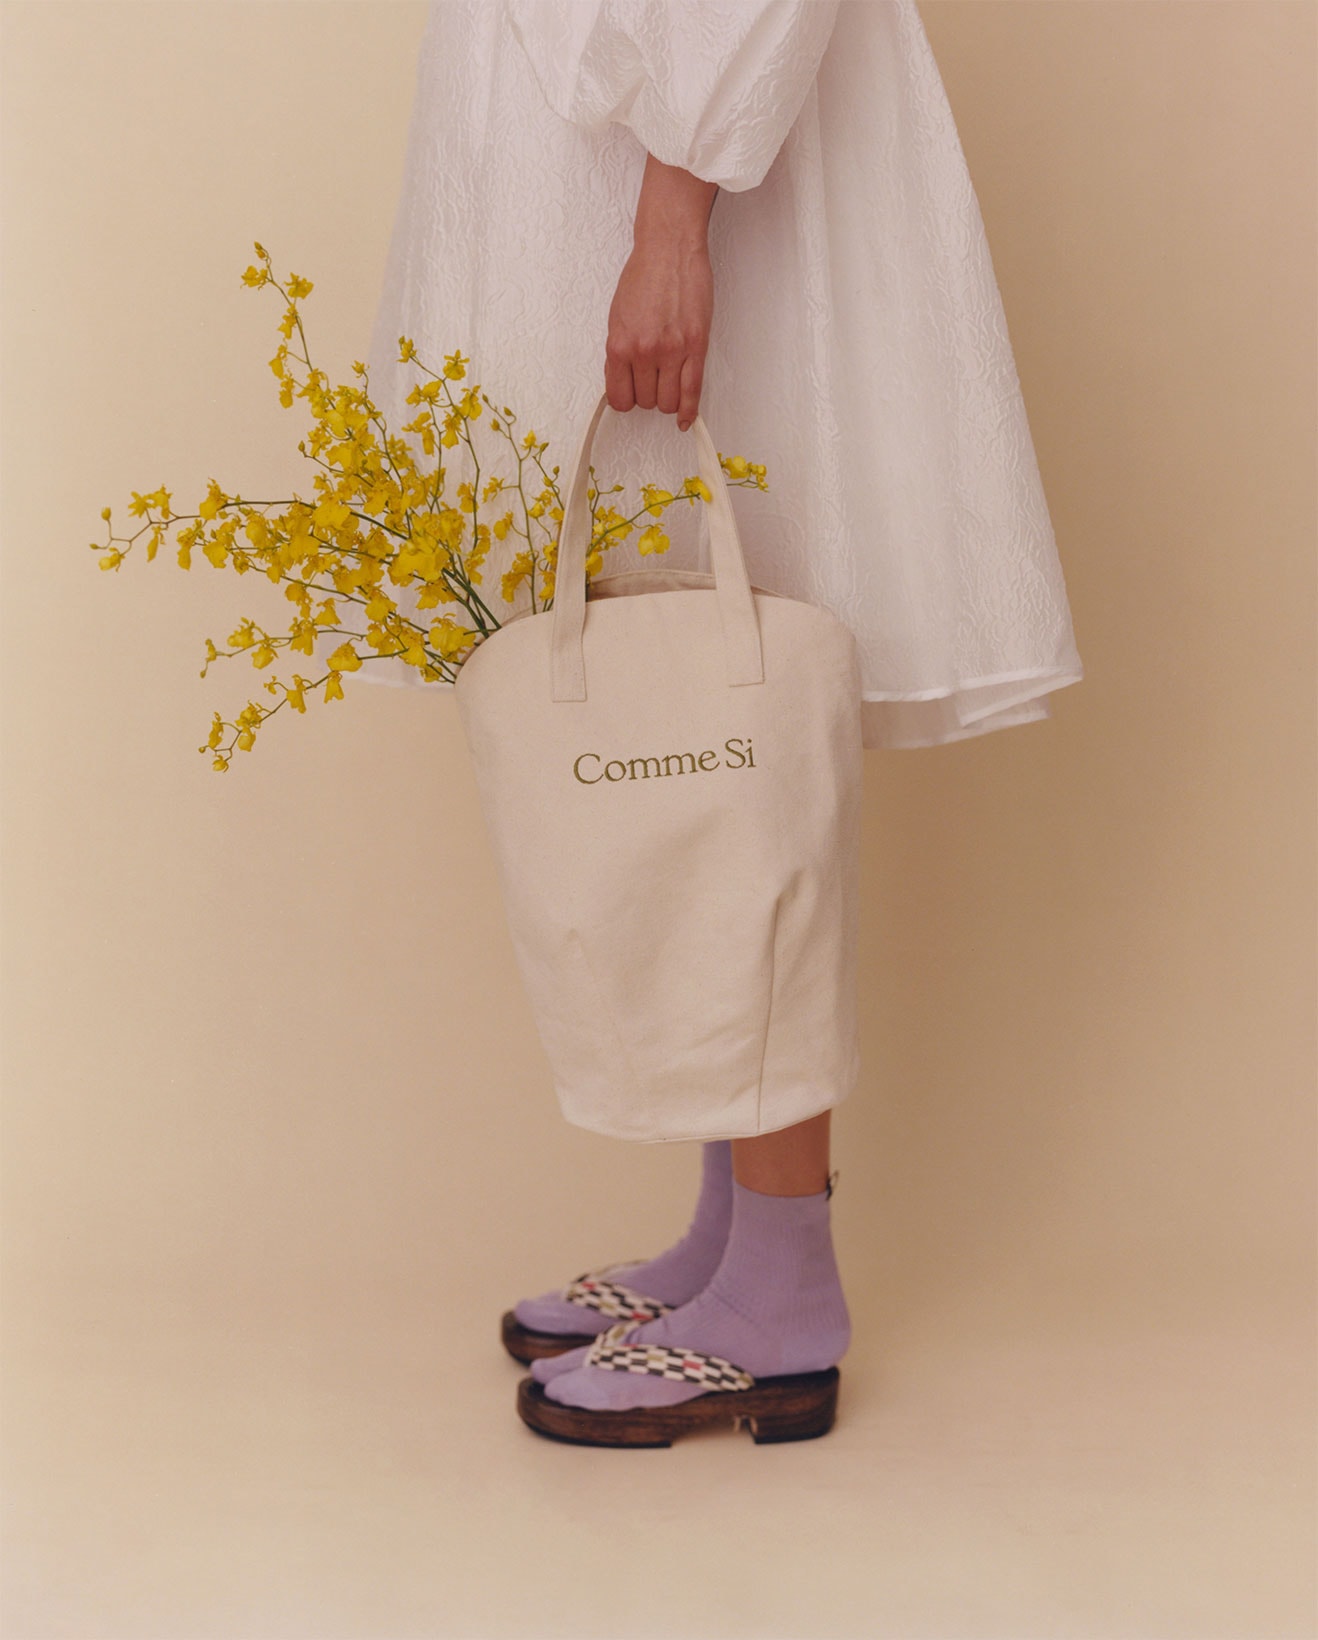 comme si say it with flowers campaign korean asian american tote bag marbled socks purple